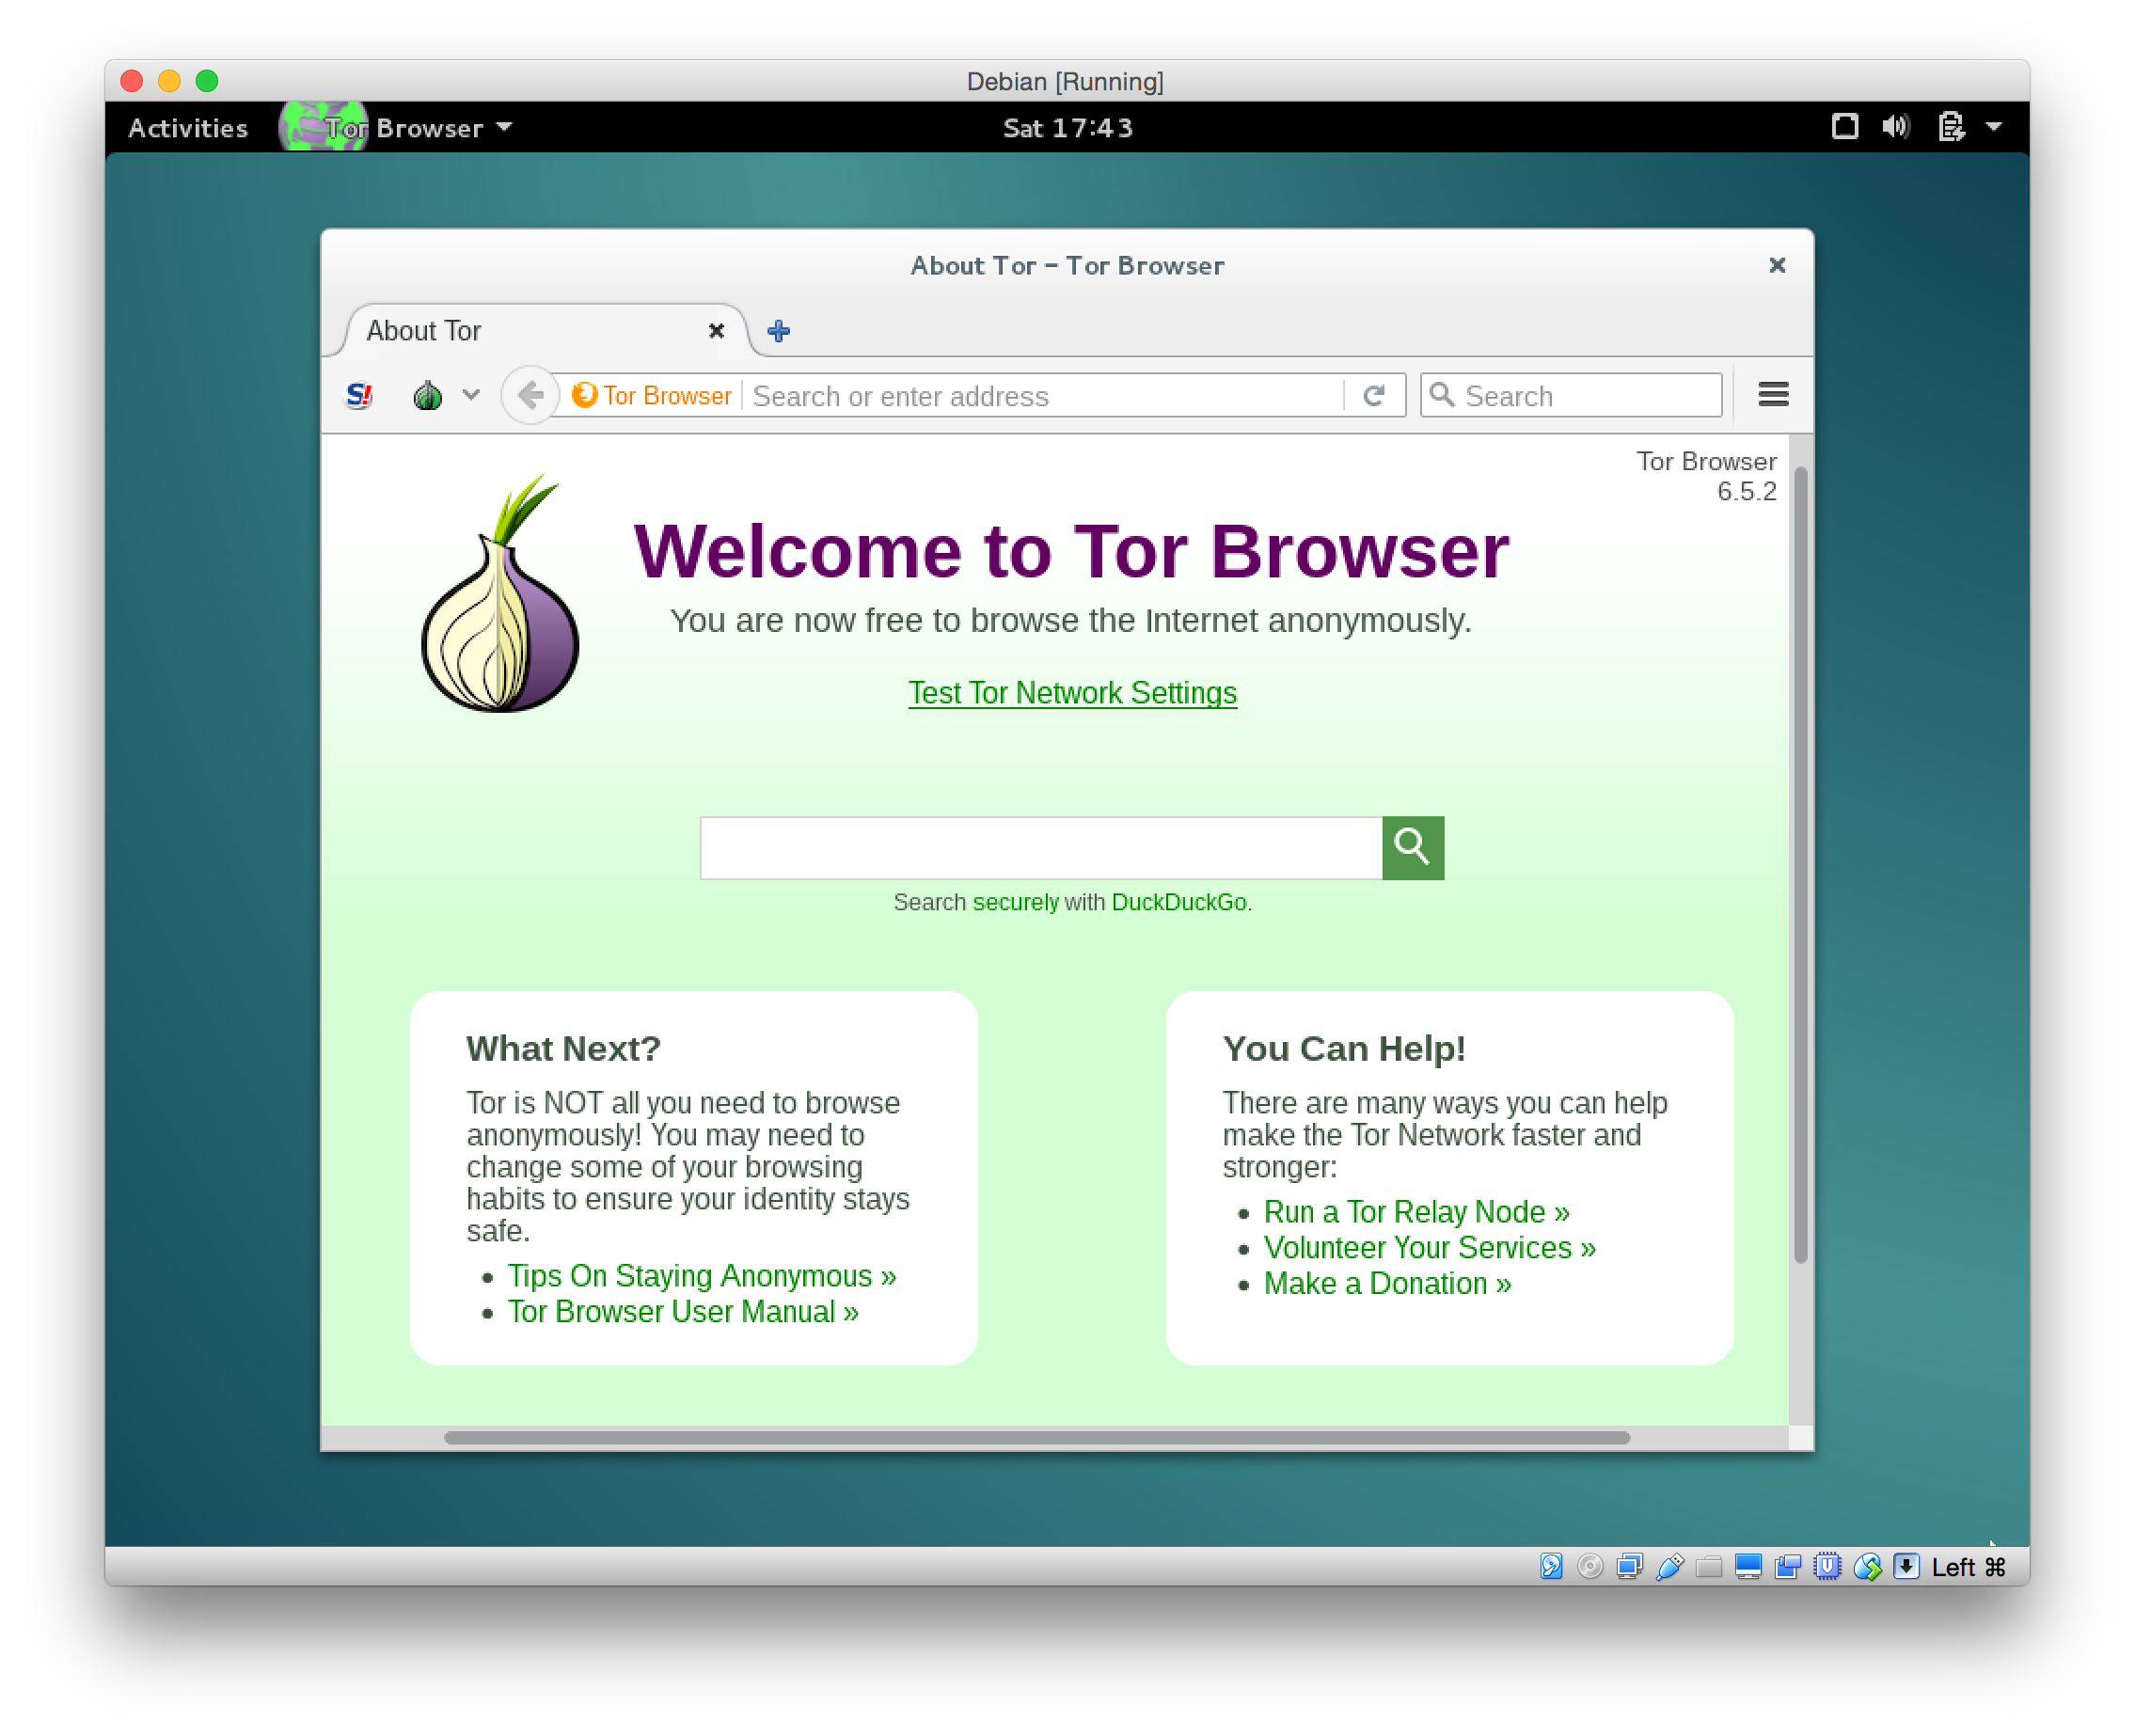 Tor browser does not have permission to access the profile please настроить прокси сервера на тор браузере hydra